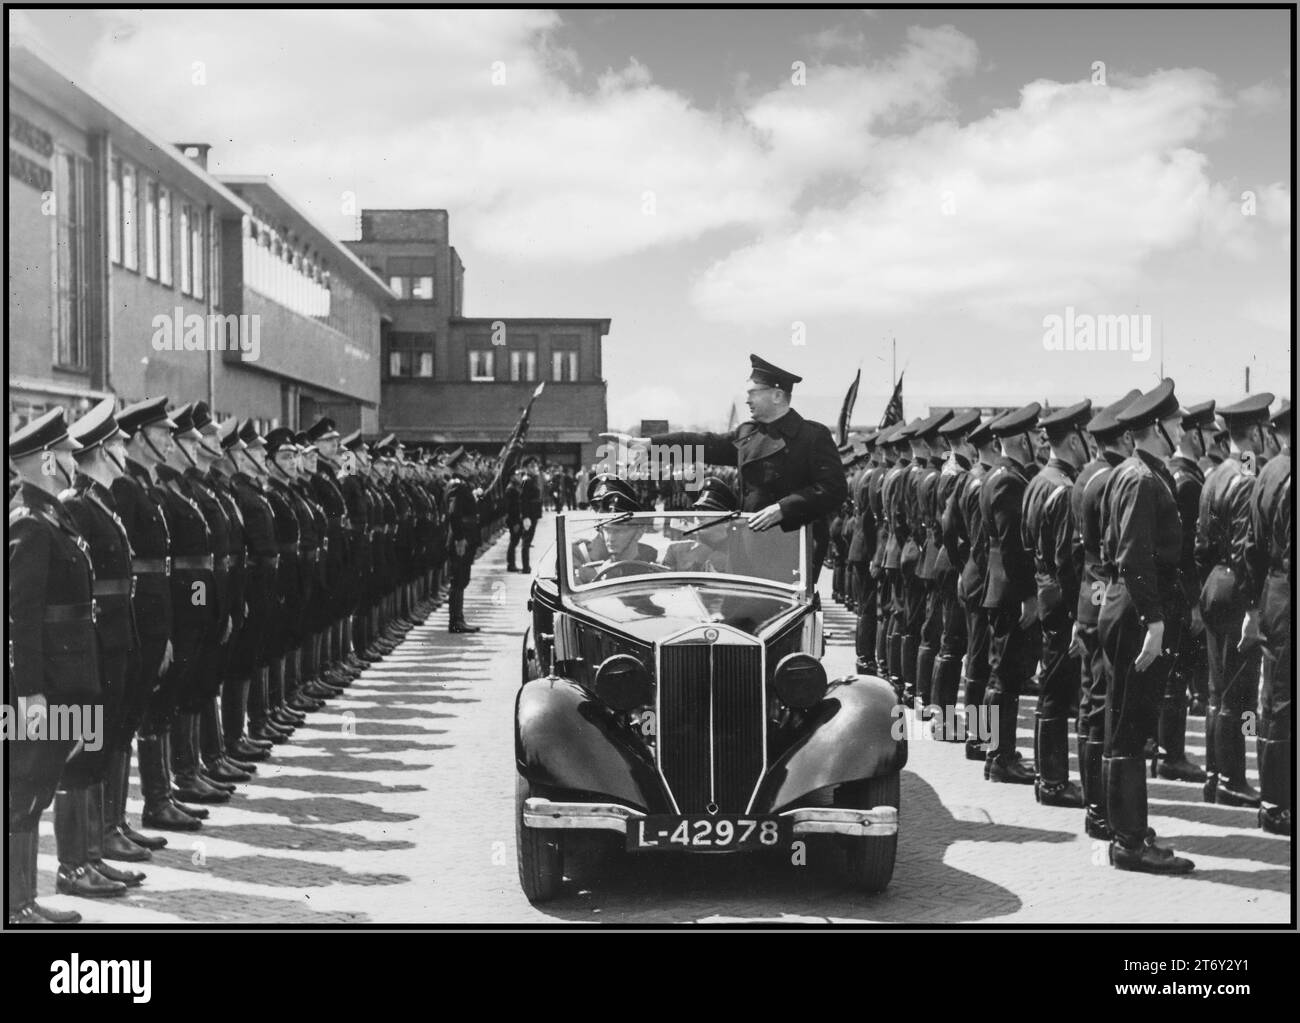 MUSSERT Vintage 1941 Dutch WW2 NSB Nazi Political Party led by Anton Mussert a Nazi collaborator at a parade reviewing his troops, giving a facist style salute. World War II Second World War Nazi collaboration in UTRECHTHolland Stock Photo